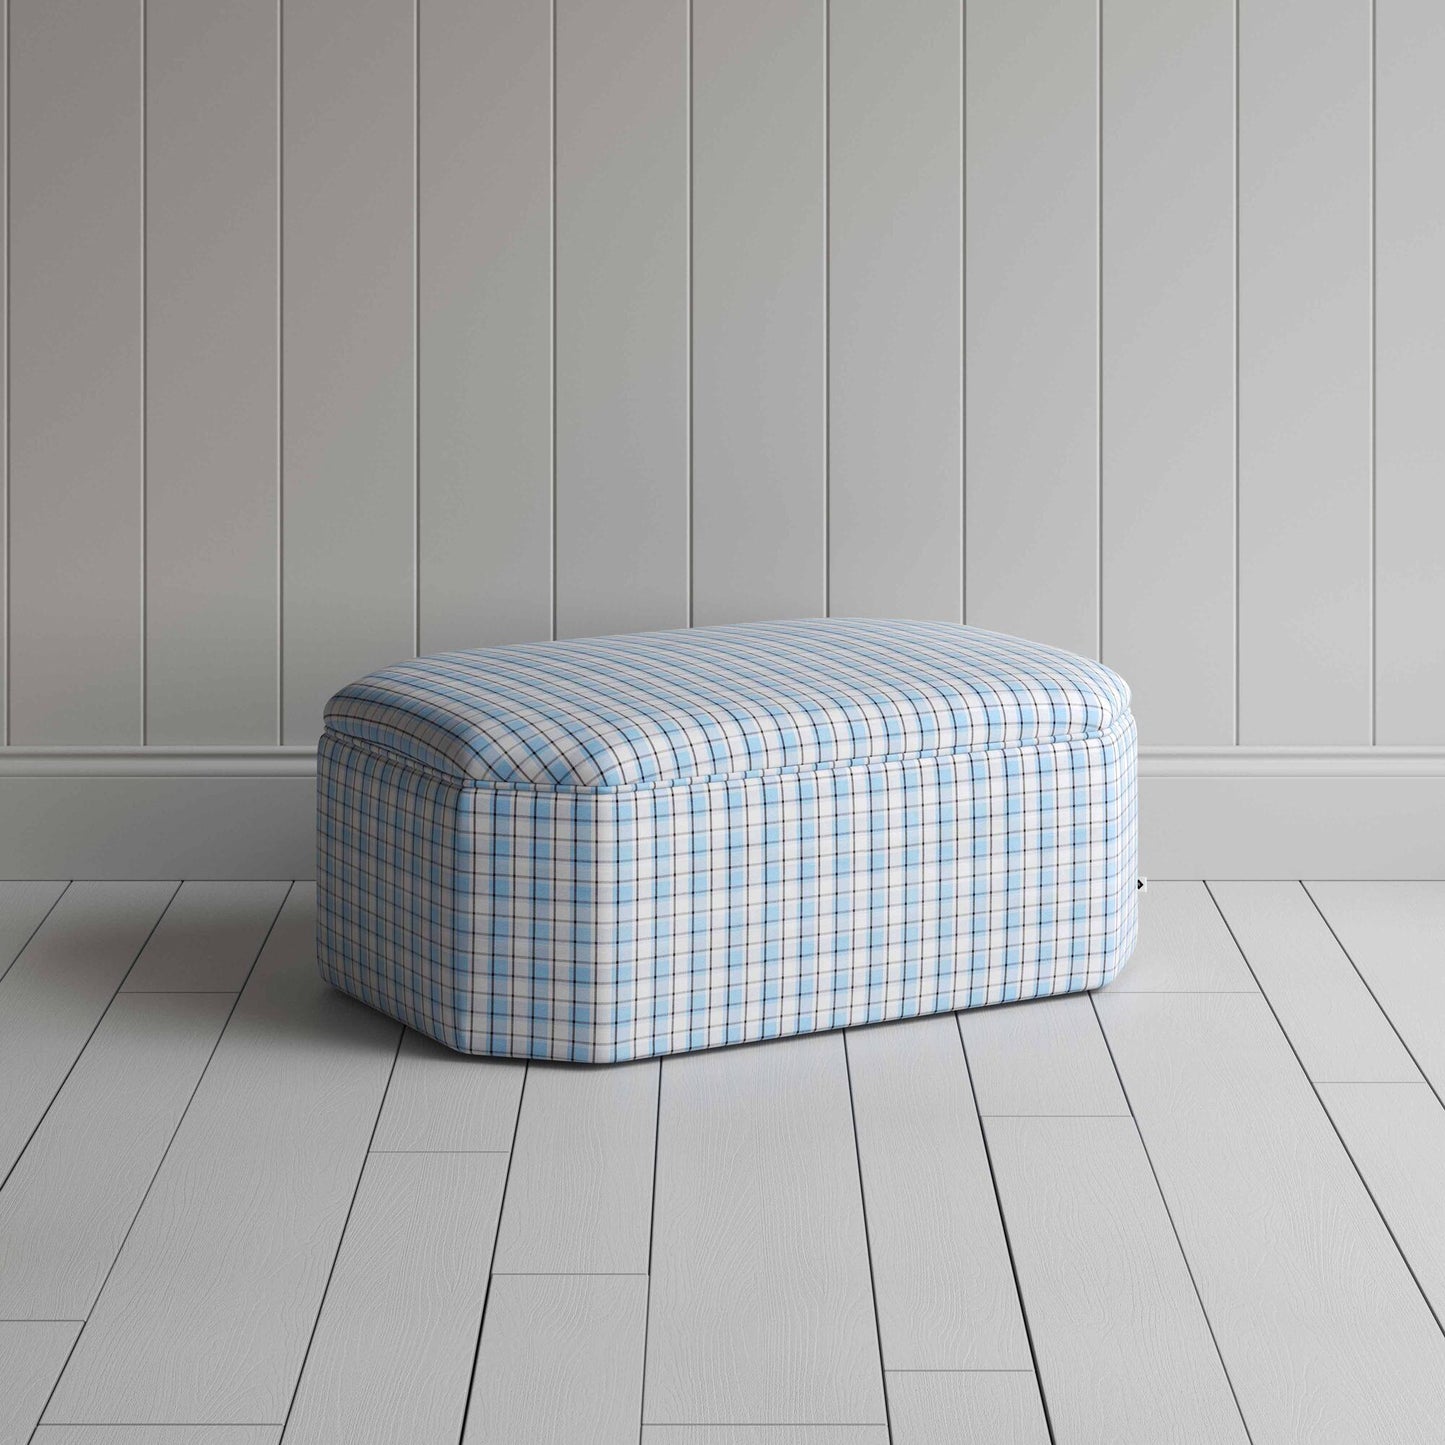 Hither Hexagonal Ottoman in Square Deal Cotton, Blue Brown